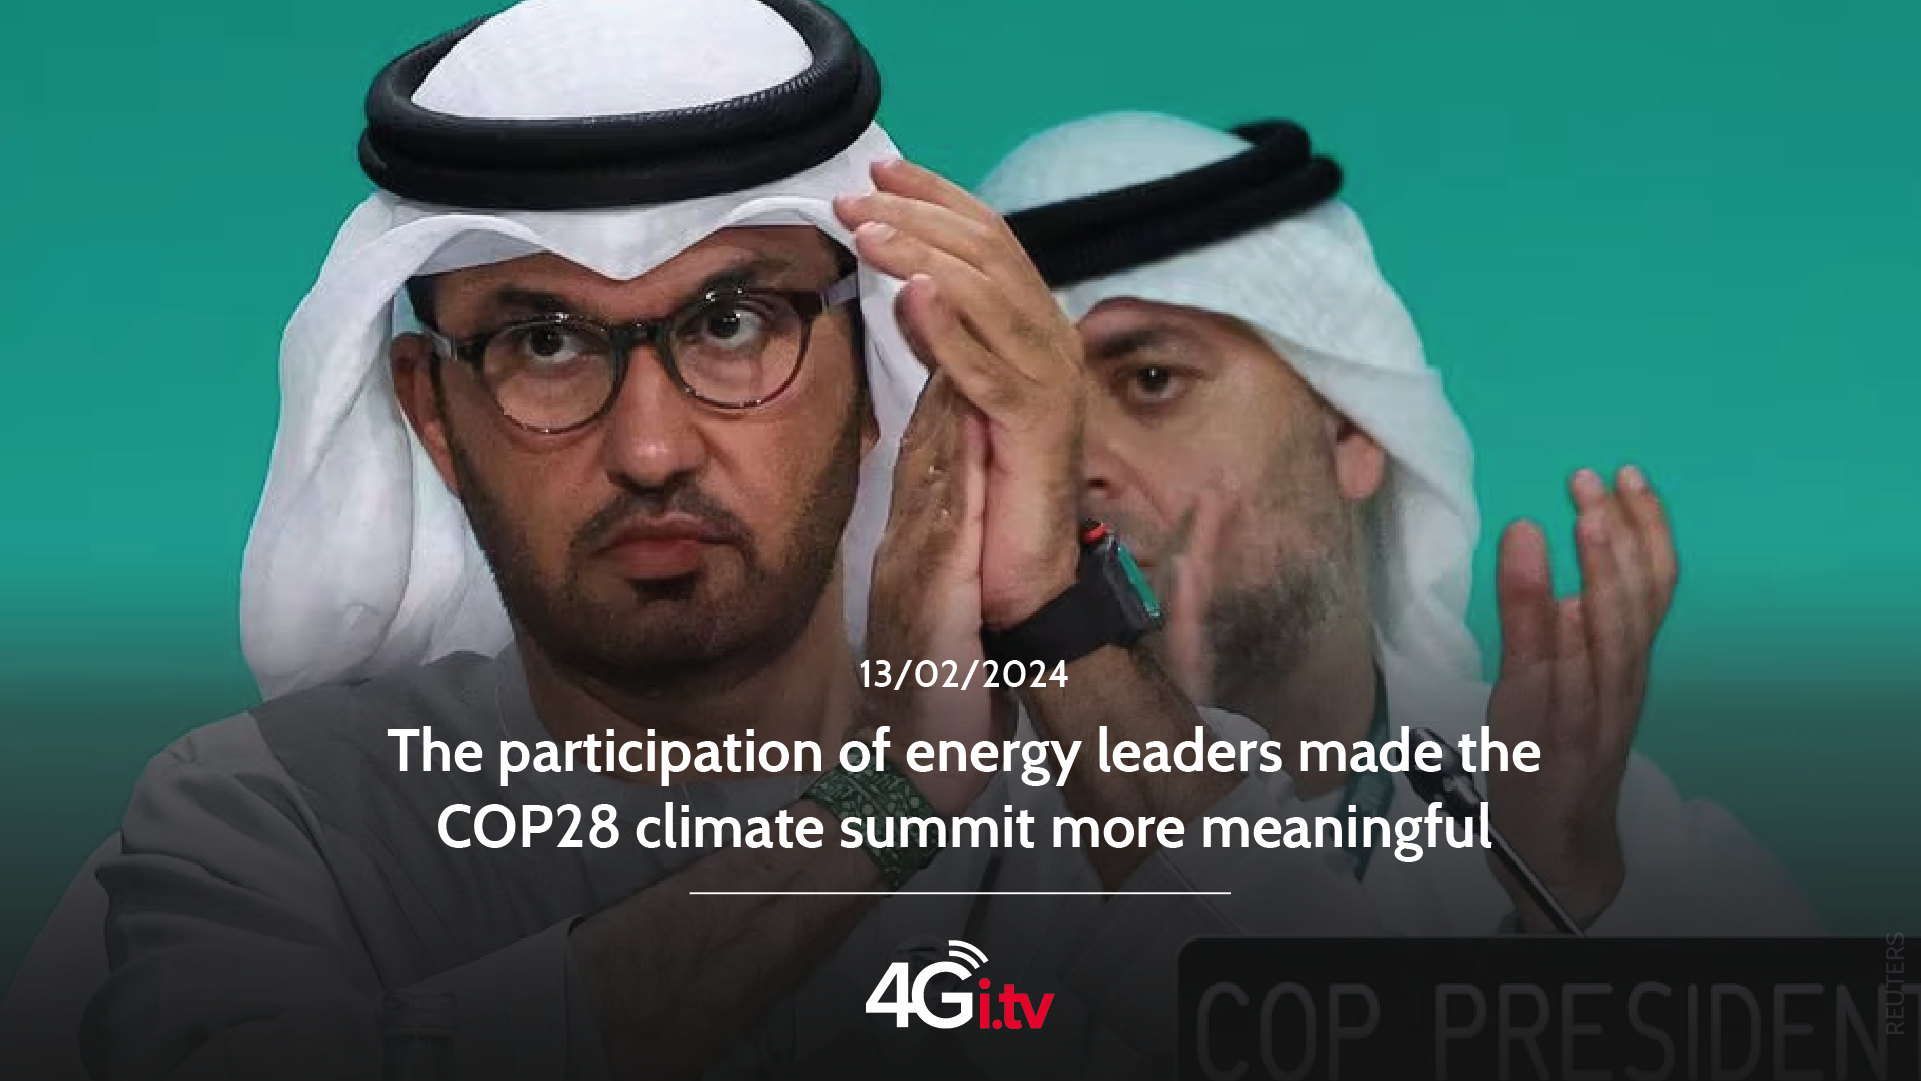 Подробнее о статье The participation of energy leaders made the COP28 climate summit more meaningful 